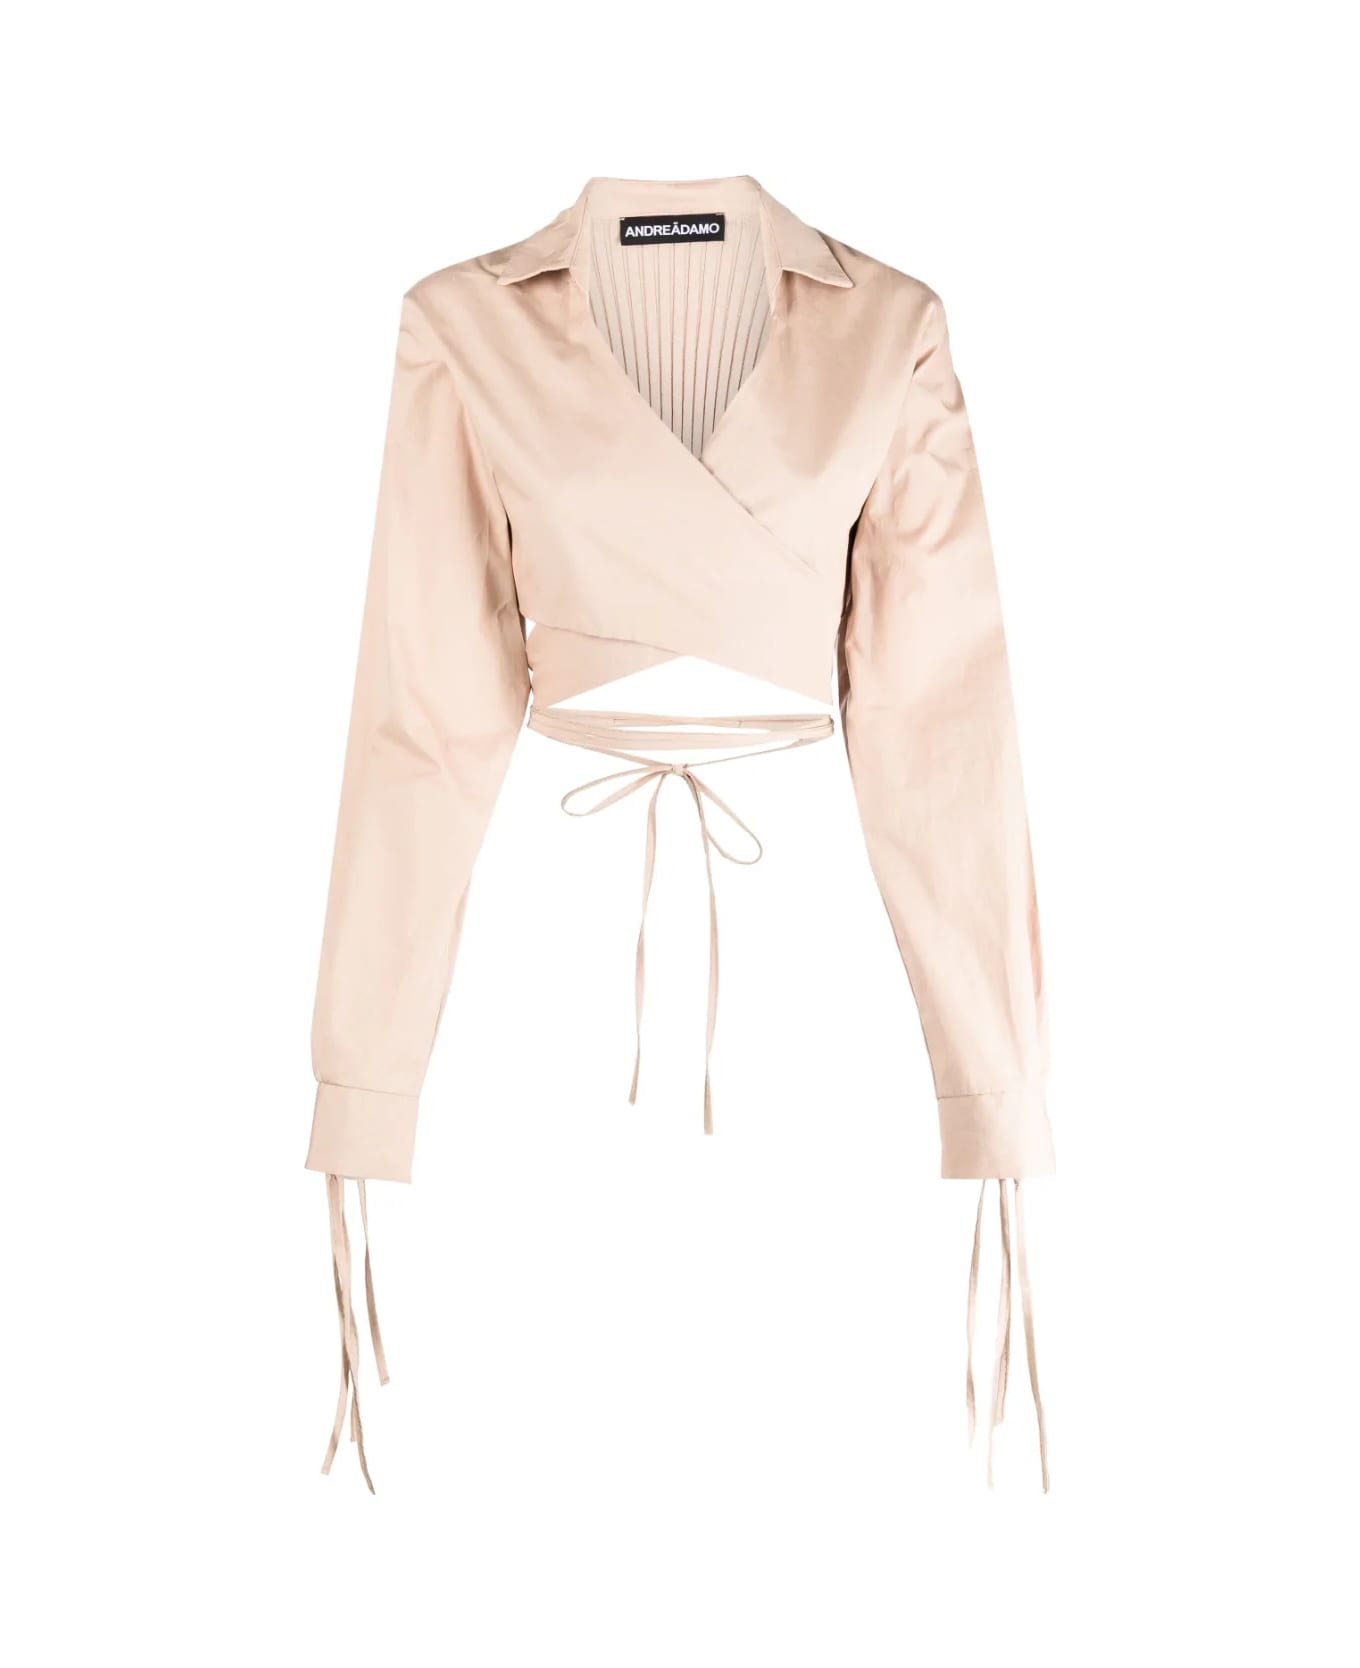 ANDREĀDAMO Nude Poplin Cardigan With Knitted Insert - Pink